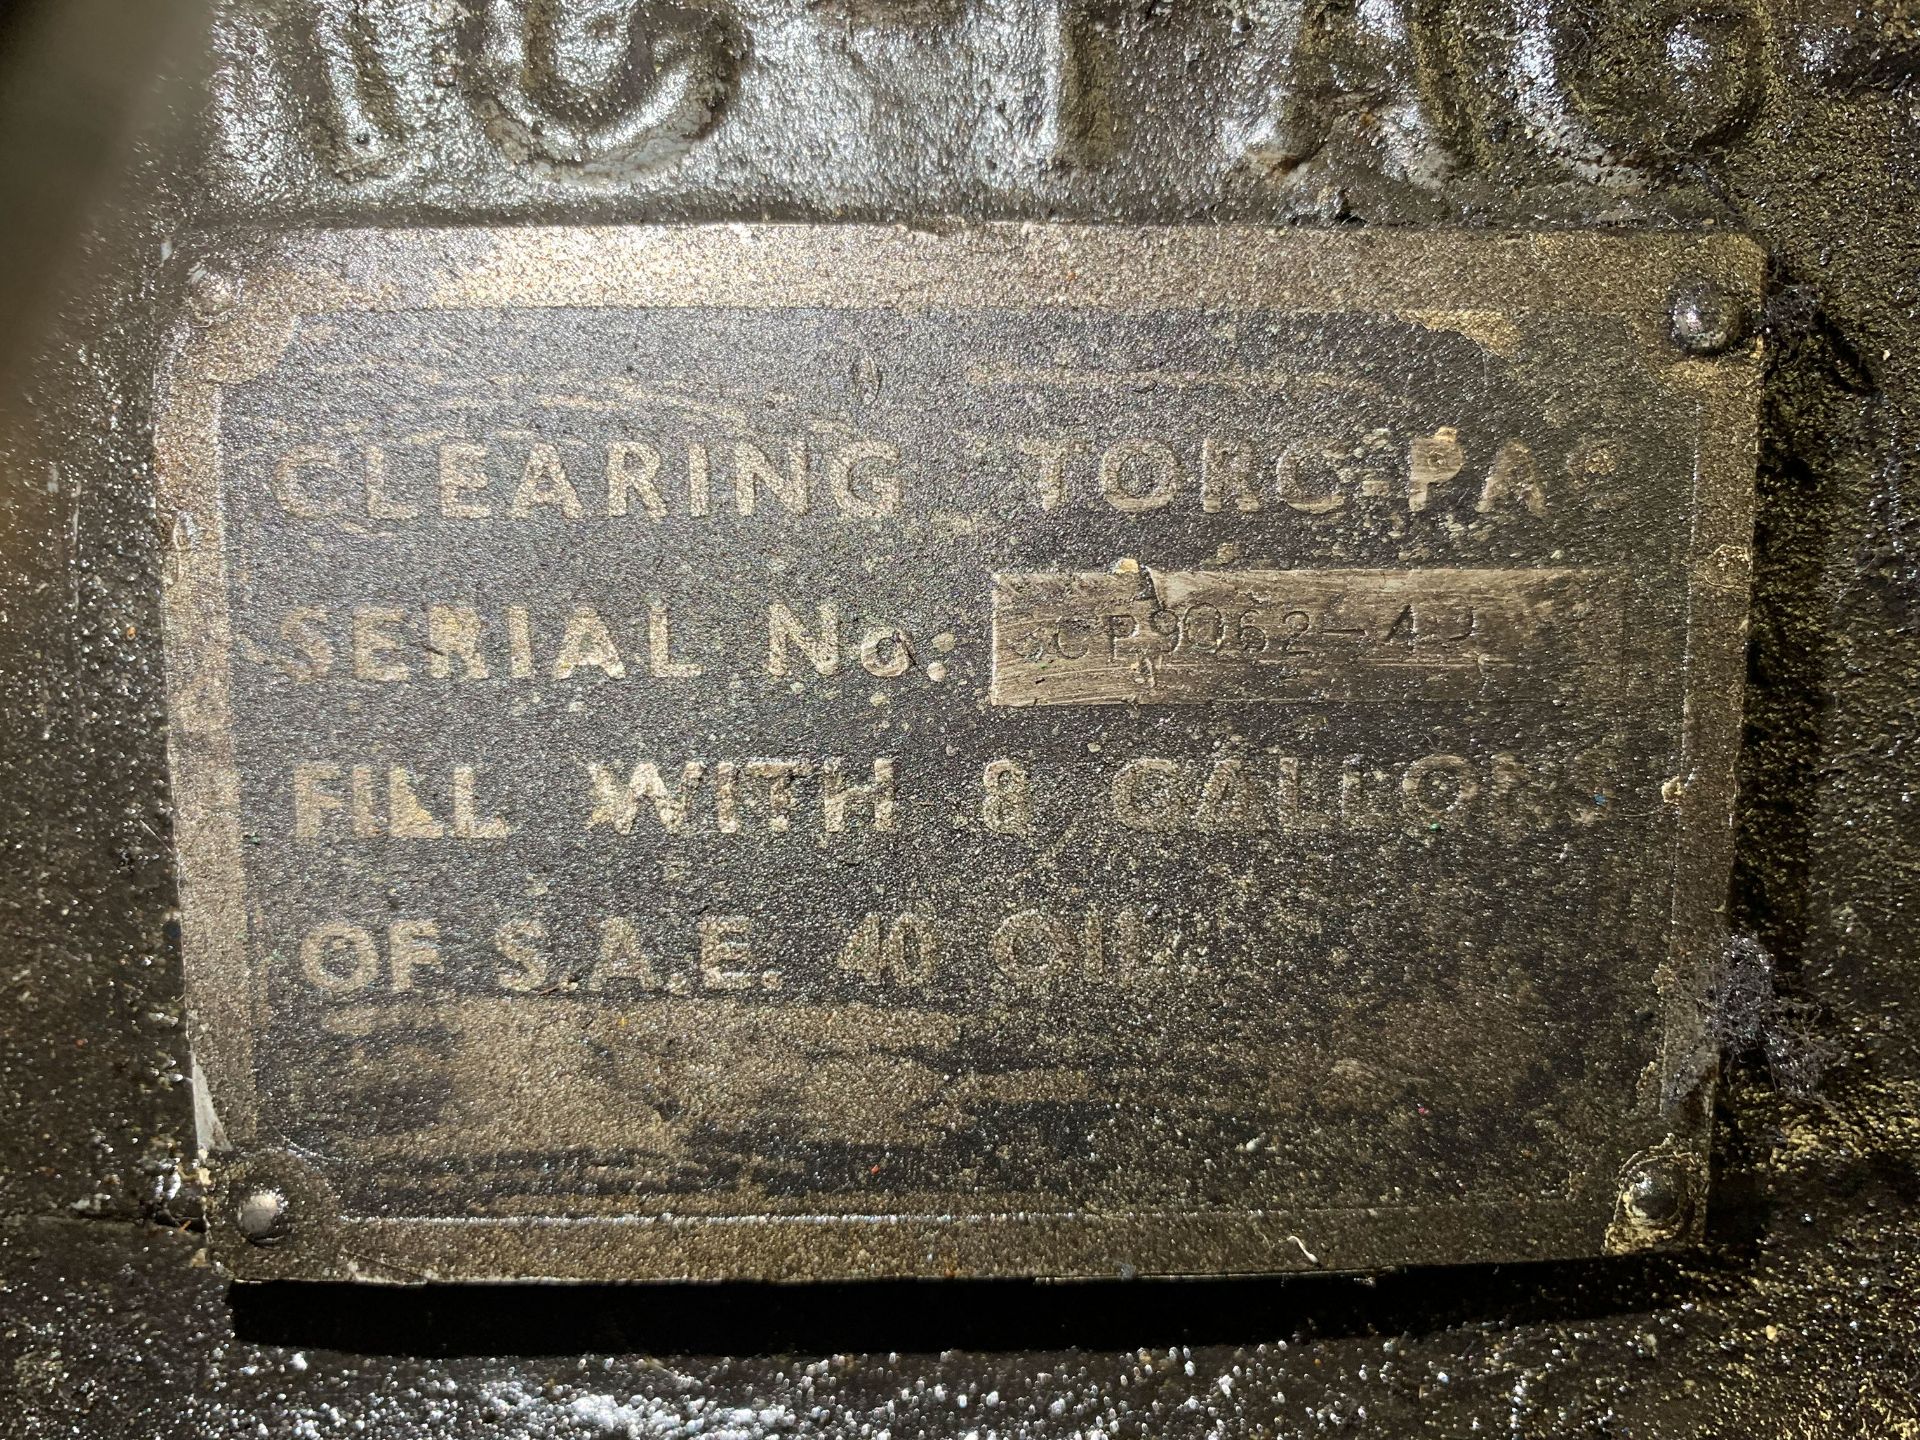 A Clearing Torcpac 40 Replacement Press Gearbox - Image 5 of 7